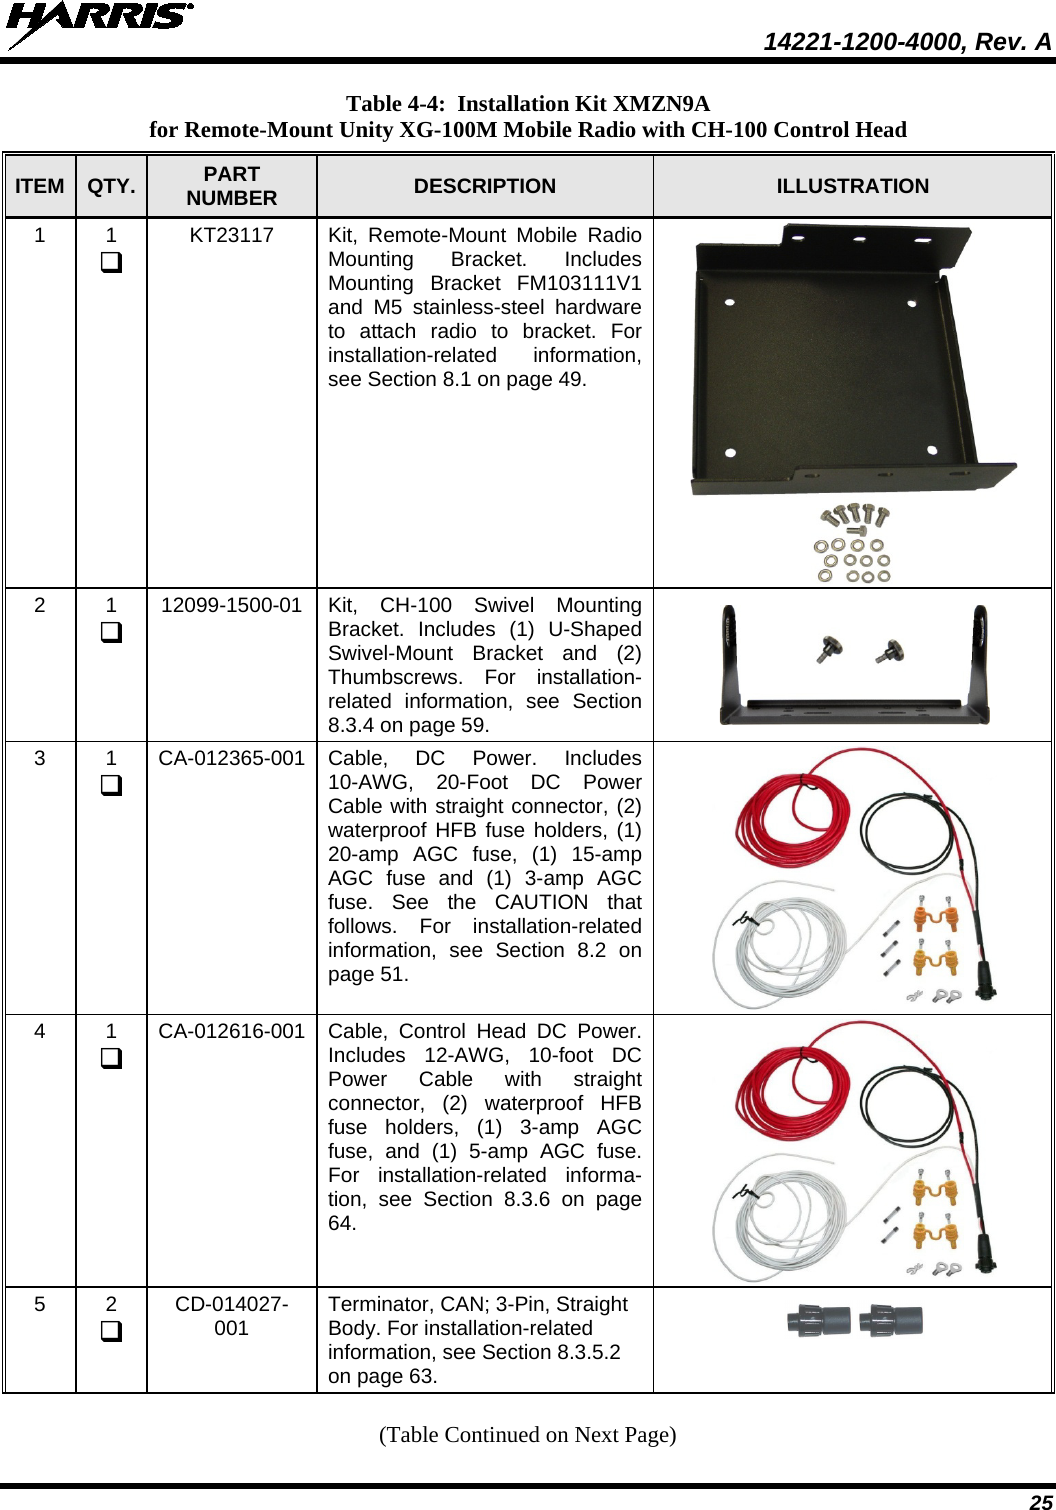  14221-1200-4000, Rev. A  25 Table 4-4:  Installation Kit XMZN9A for Remote-Mount Unity XG-100M Mobile Radio with CH-100 Control Head ITEM QTY. PART NUMBER DESCRIPTION  ILLUSTRATION 1  1  KT23117 Kit, Remote-Mount Mobile Radio Mounting Bracket. Includes Mounting Bracket FM103111V1 and M5 stainless-steel hardware to attach radio to bracket. For installation-related information, see Section 8.1 on page 49.  2  1  12099-1500-01 Kit, CH-100 Swivel Mounting Bracket. Includes (1) U-Shaped Swivel-Mount Bracket and (2) Thumbscrews. For installation-related information, see Section 8.3.4 on page 59.   3  1  CA-012365-001 Cable, DC Power. Includes 10-AWG, 20-Foot DC Power Cable with straight connector, (2) waterproof HFB fuse holders, (1) 20-amp AGC fuse, (1) 15-amp AGC fuse and (1) 3-amp AGC fuse. See the CAUTION that follows. For installation-related information, see Section 8.2 on page 51.  4  1  CA-012616-001 Cable, Control Head DC Power. Includes 12-AWG, 10-foot DC Power Cable with straight connector, (2) waterproof HFB fuse holders, (1) 3-amp AGC fuse, and (1) 5-amp AGC fuse. For installation-related informa-tion, see Section 8.3.6 on page 64.  5  2  CD-014027-001 Terminator, CAN; 3-Pin, Straight Body. For installation-related information, see Section 8.3.5.2 on page 63.  (Table Continued on Next Page) 